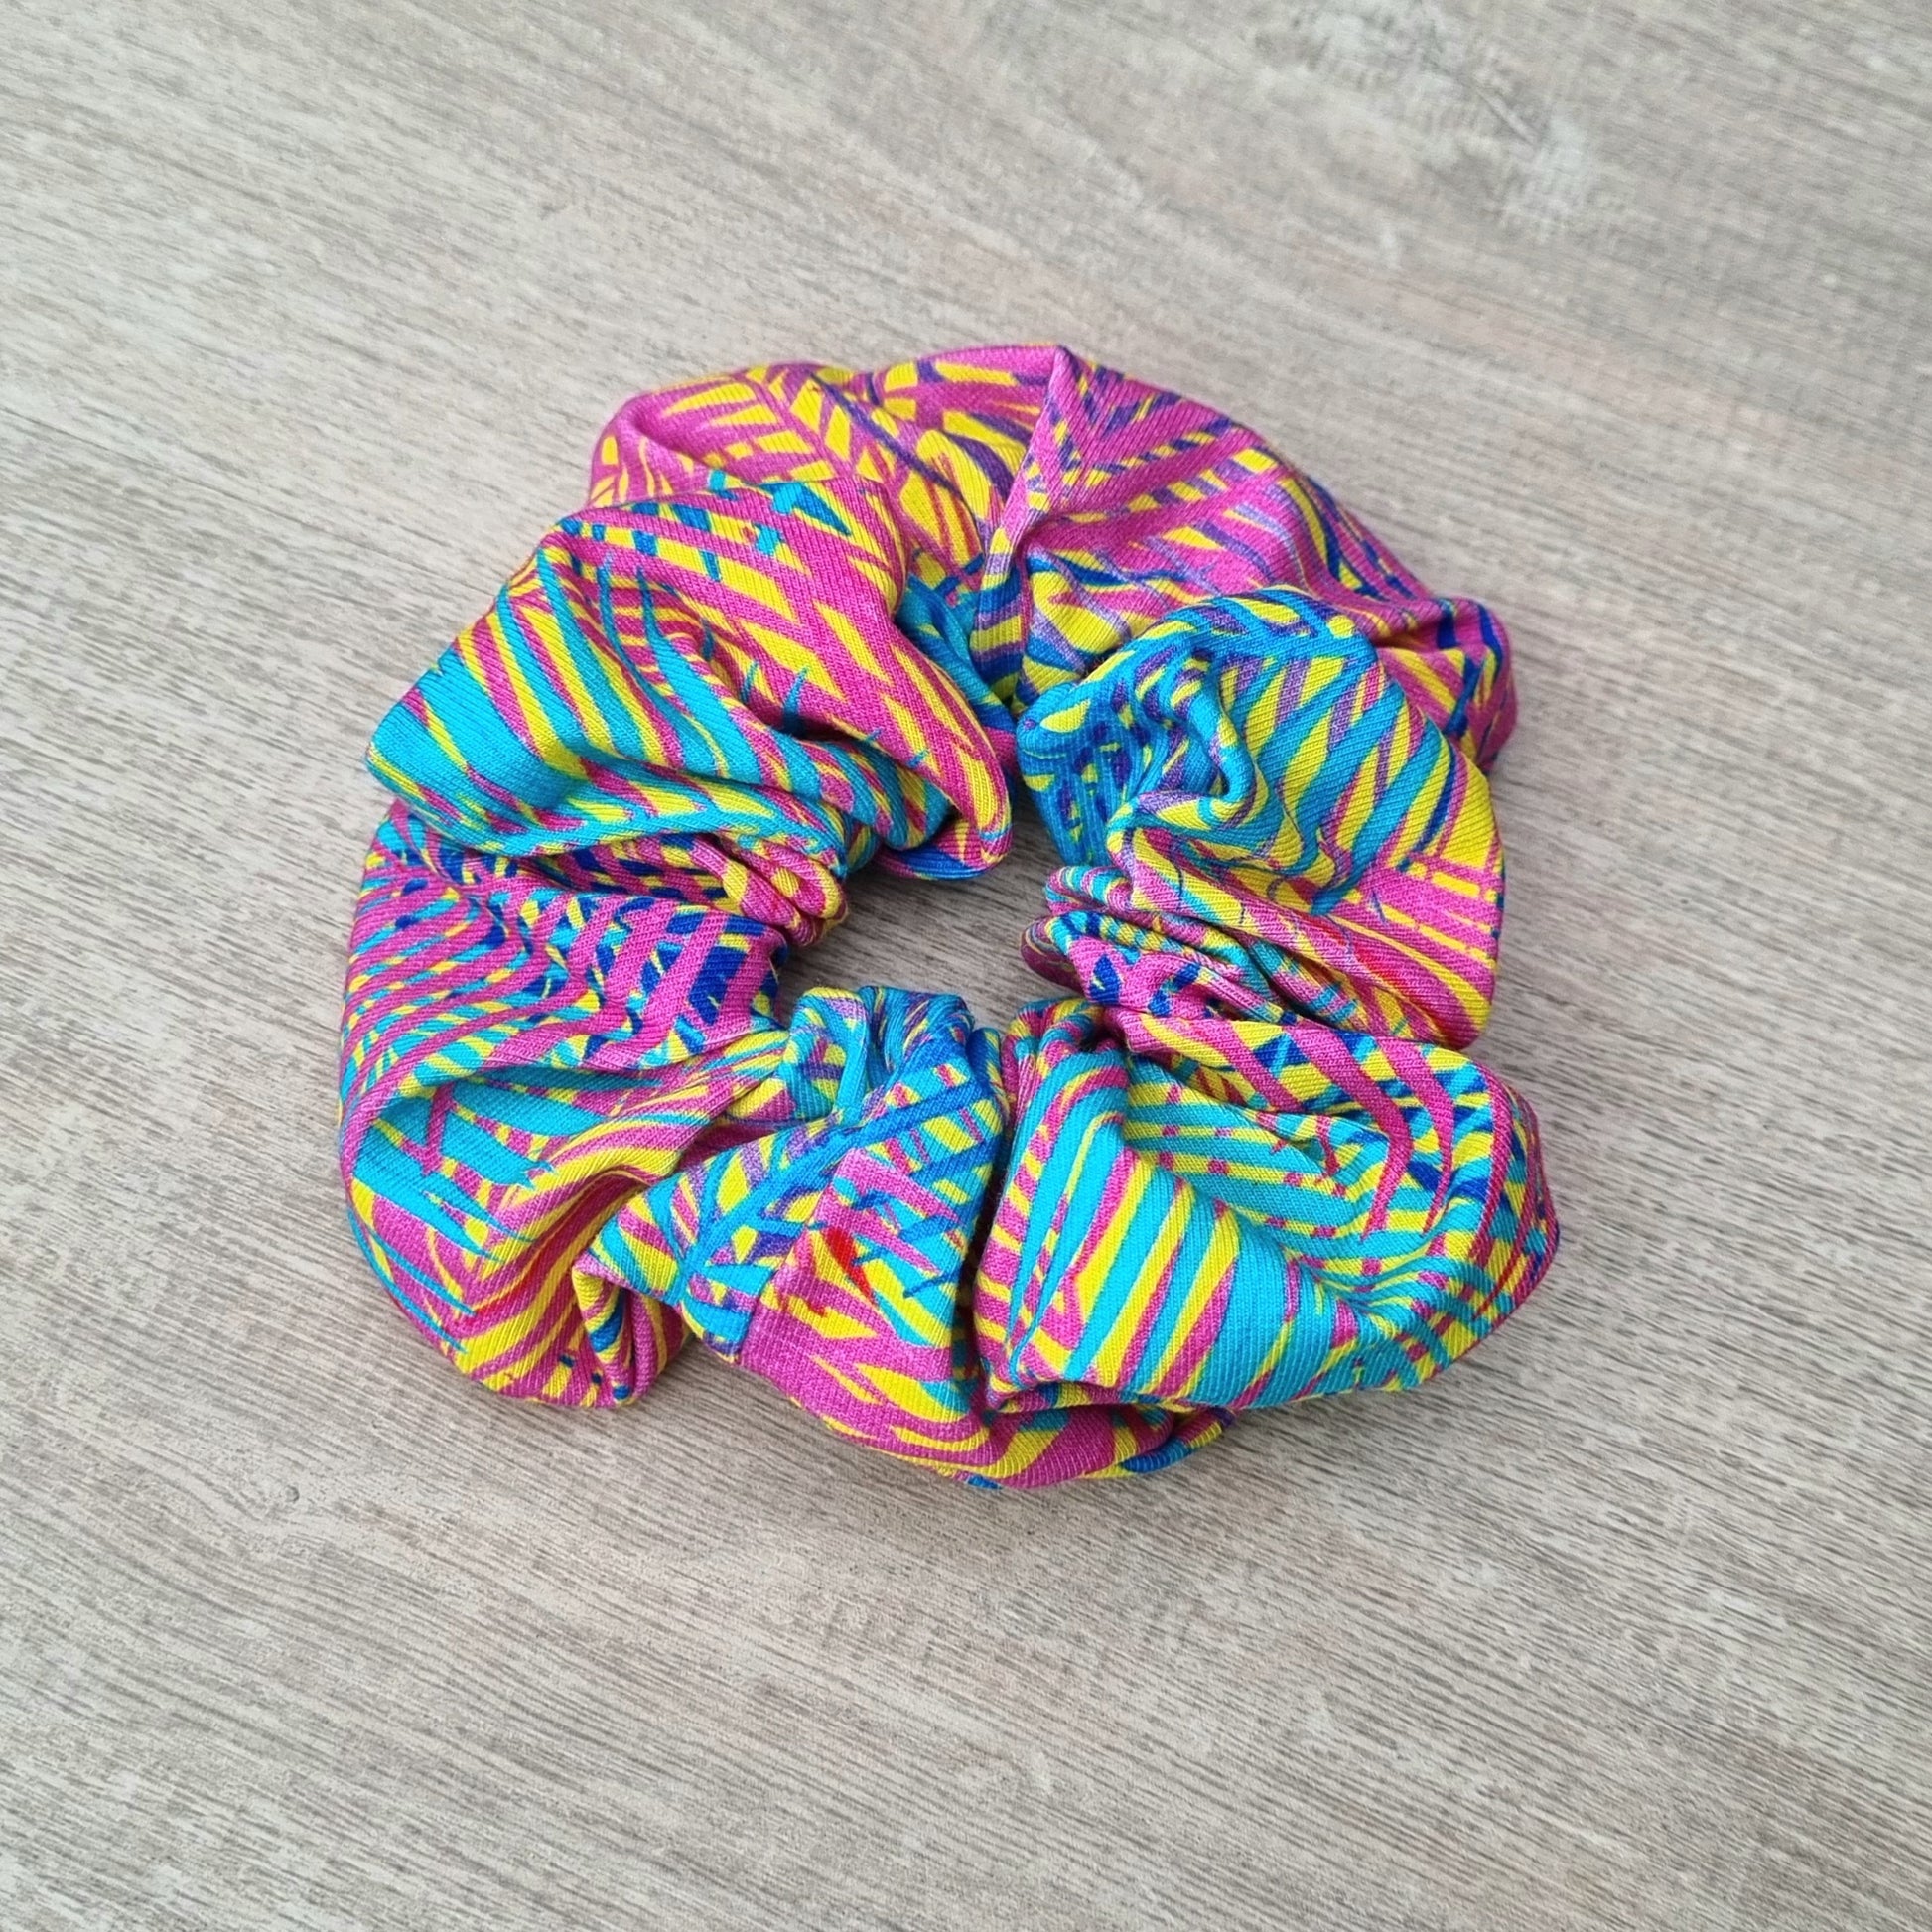 Scrunchie - Rainbow Stripes against wooden backdrop. Blue, navy and hot pink stripes on yellow background.